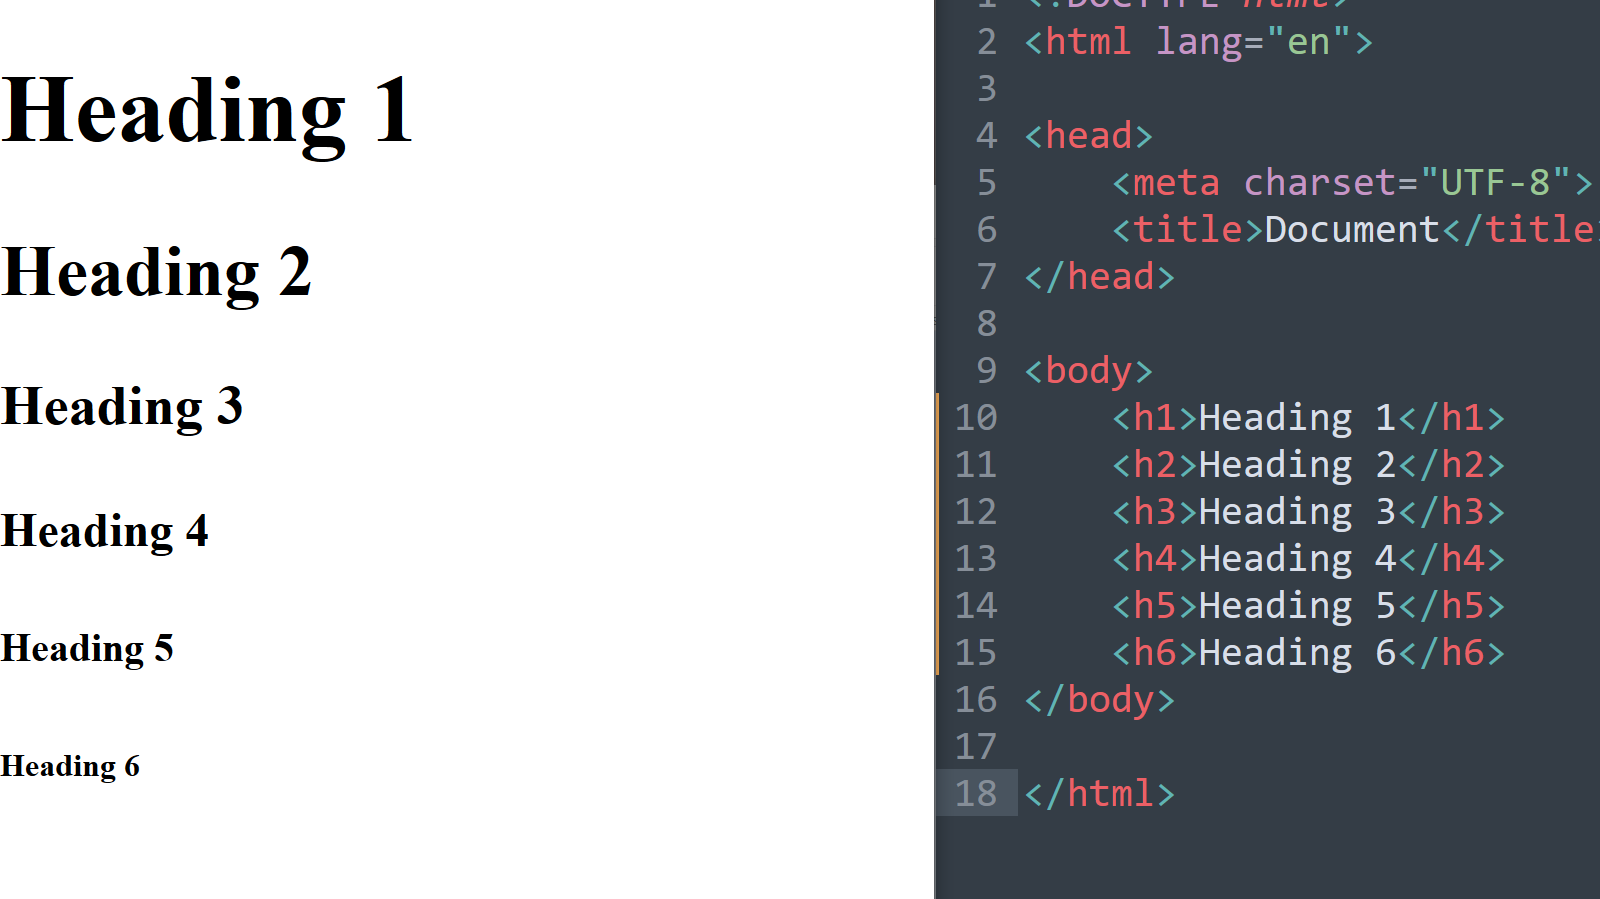 Header tags show up in the web's source code as follows